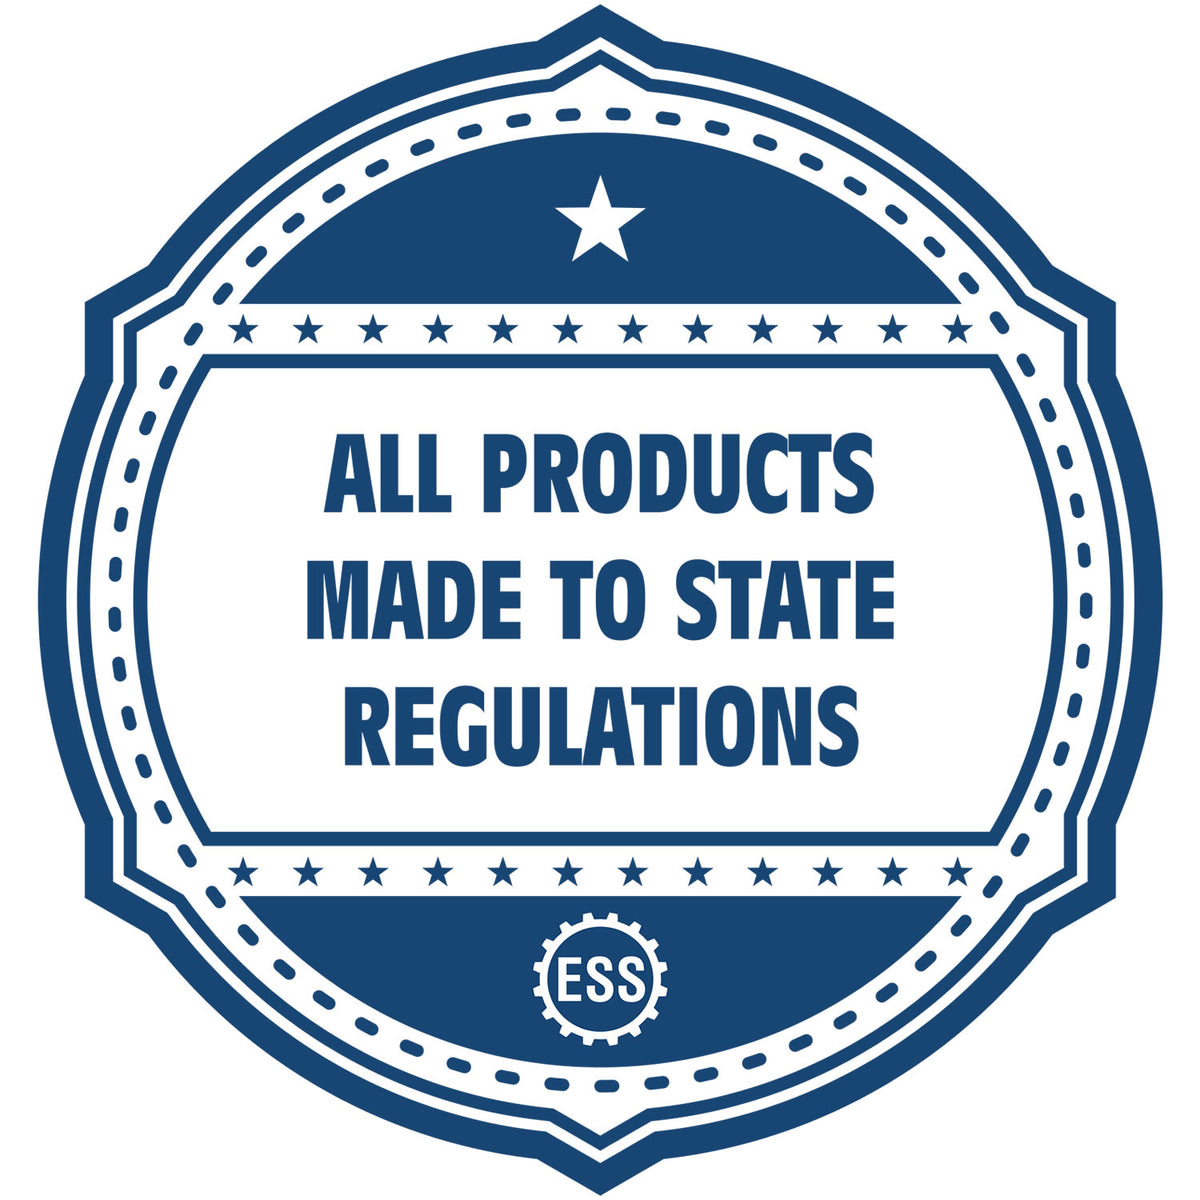 A blue icon or badge for the Hybrid Montana Landscape Architect Seal showing that this product is made in compliance with state regulations.